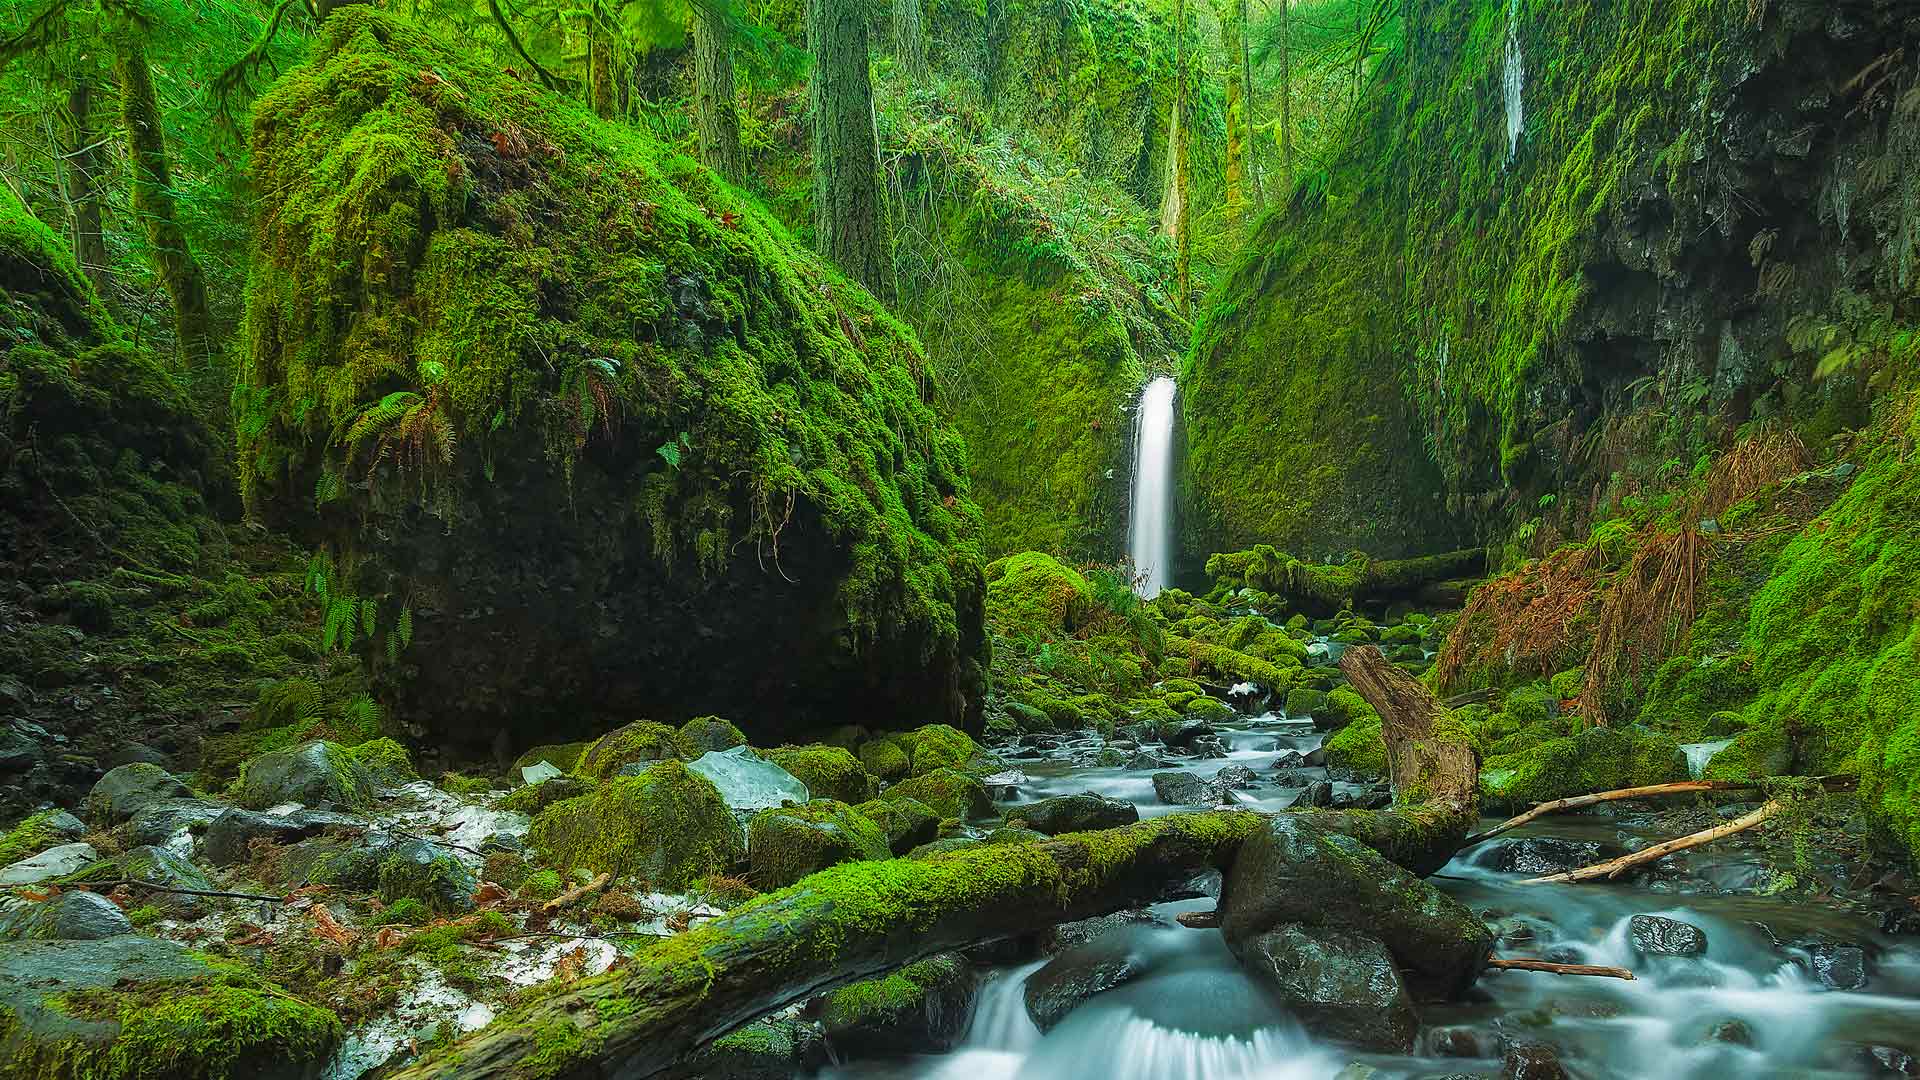 Mossy Grotto Falls